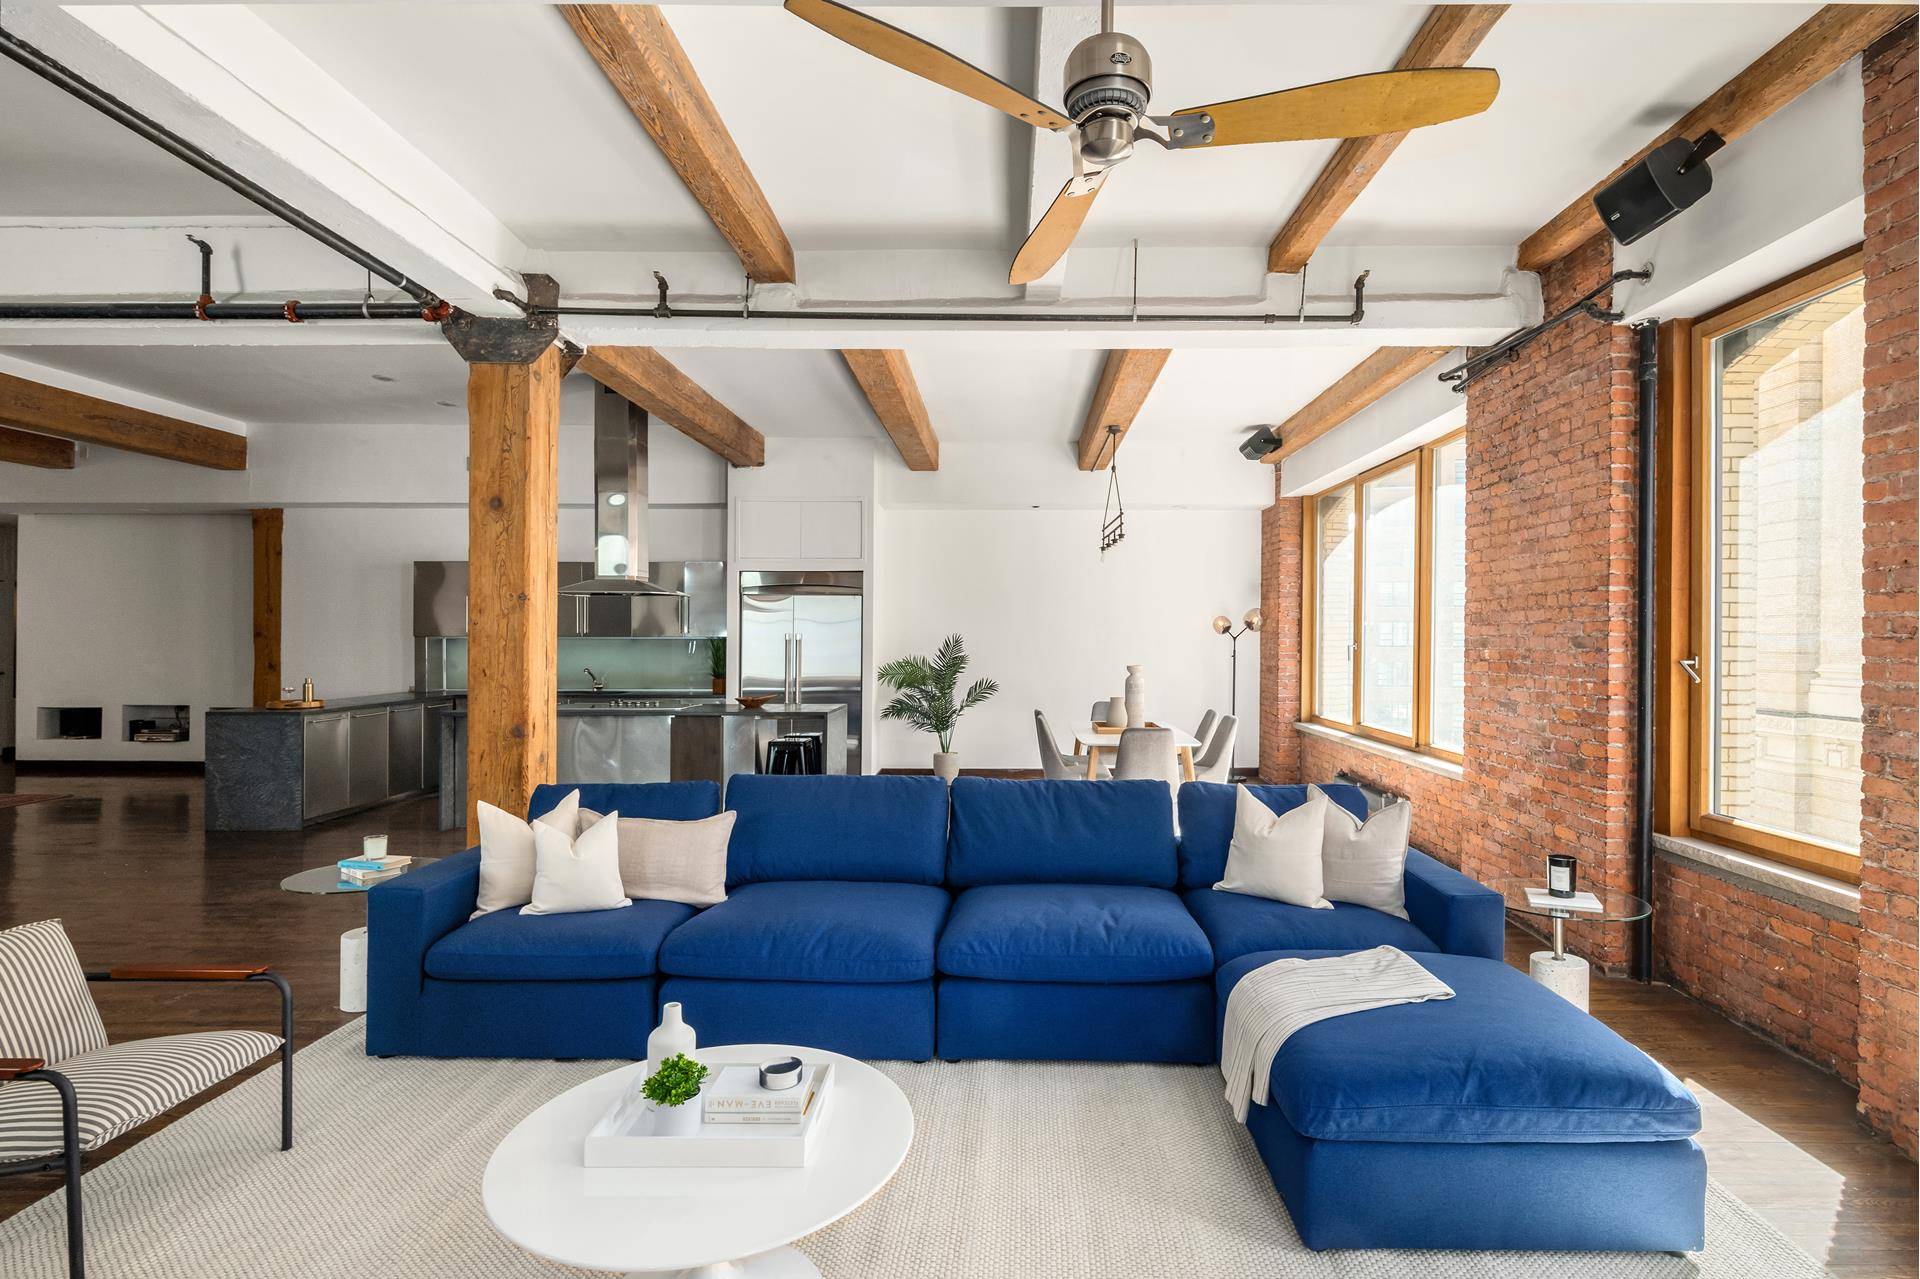 Your breathtaking, contemporary Soho loft awaits in this corner lot that can easily be converted into a sophisticated two bedroom ideally located between Spring and Broome Streets.